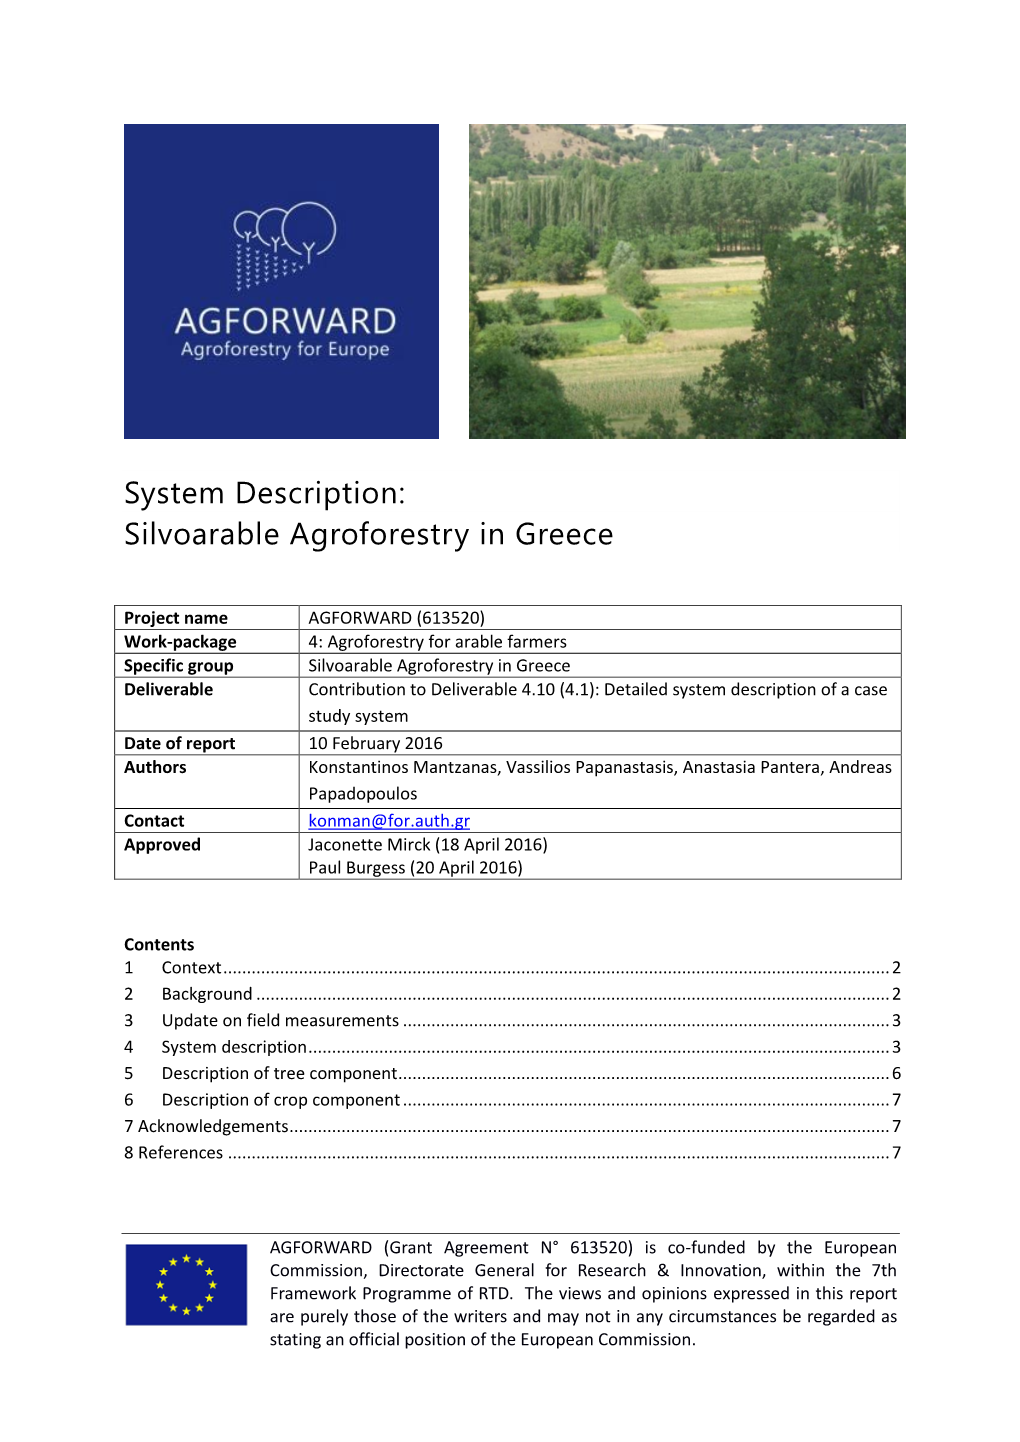 Silvoarable Agroforestry in Greece